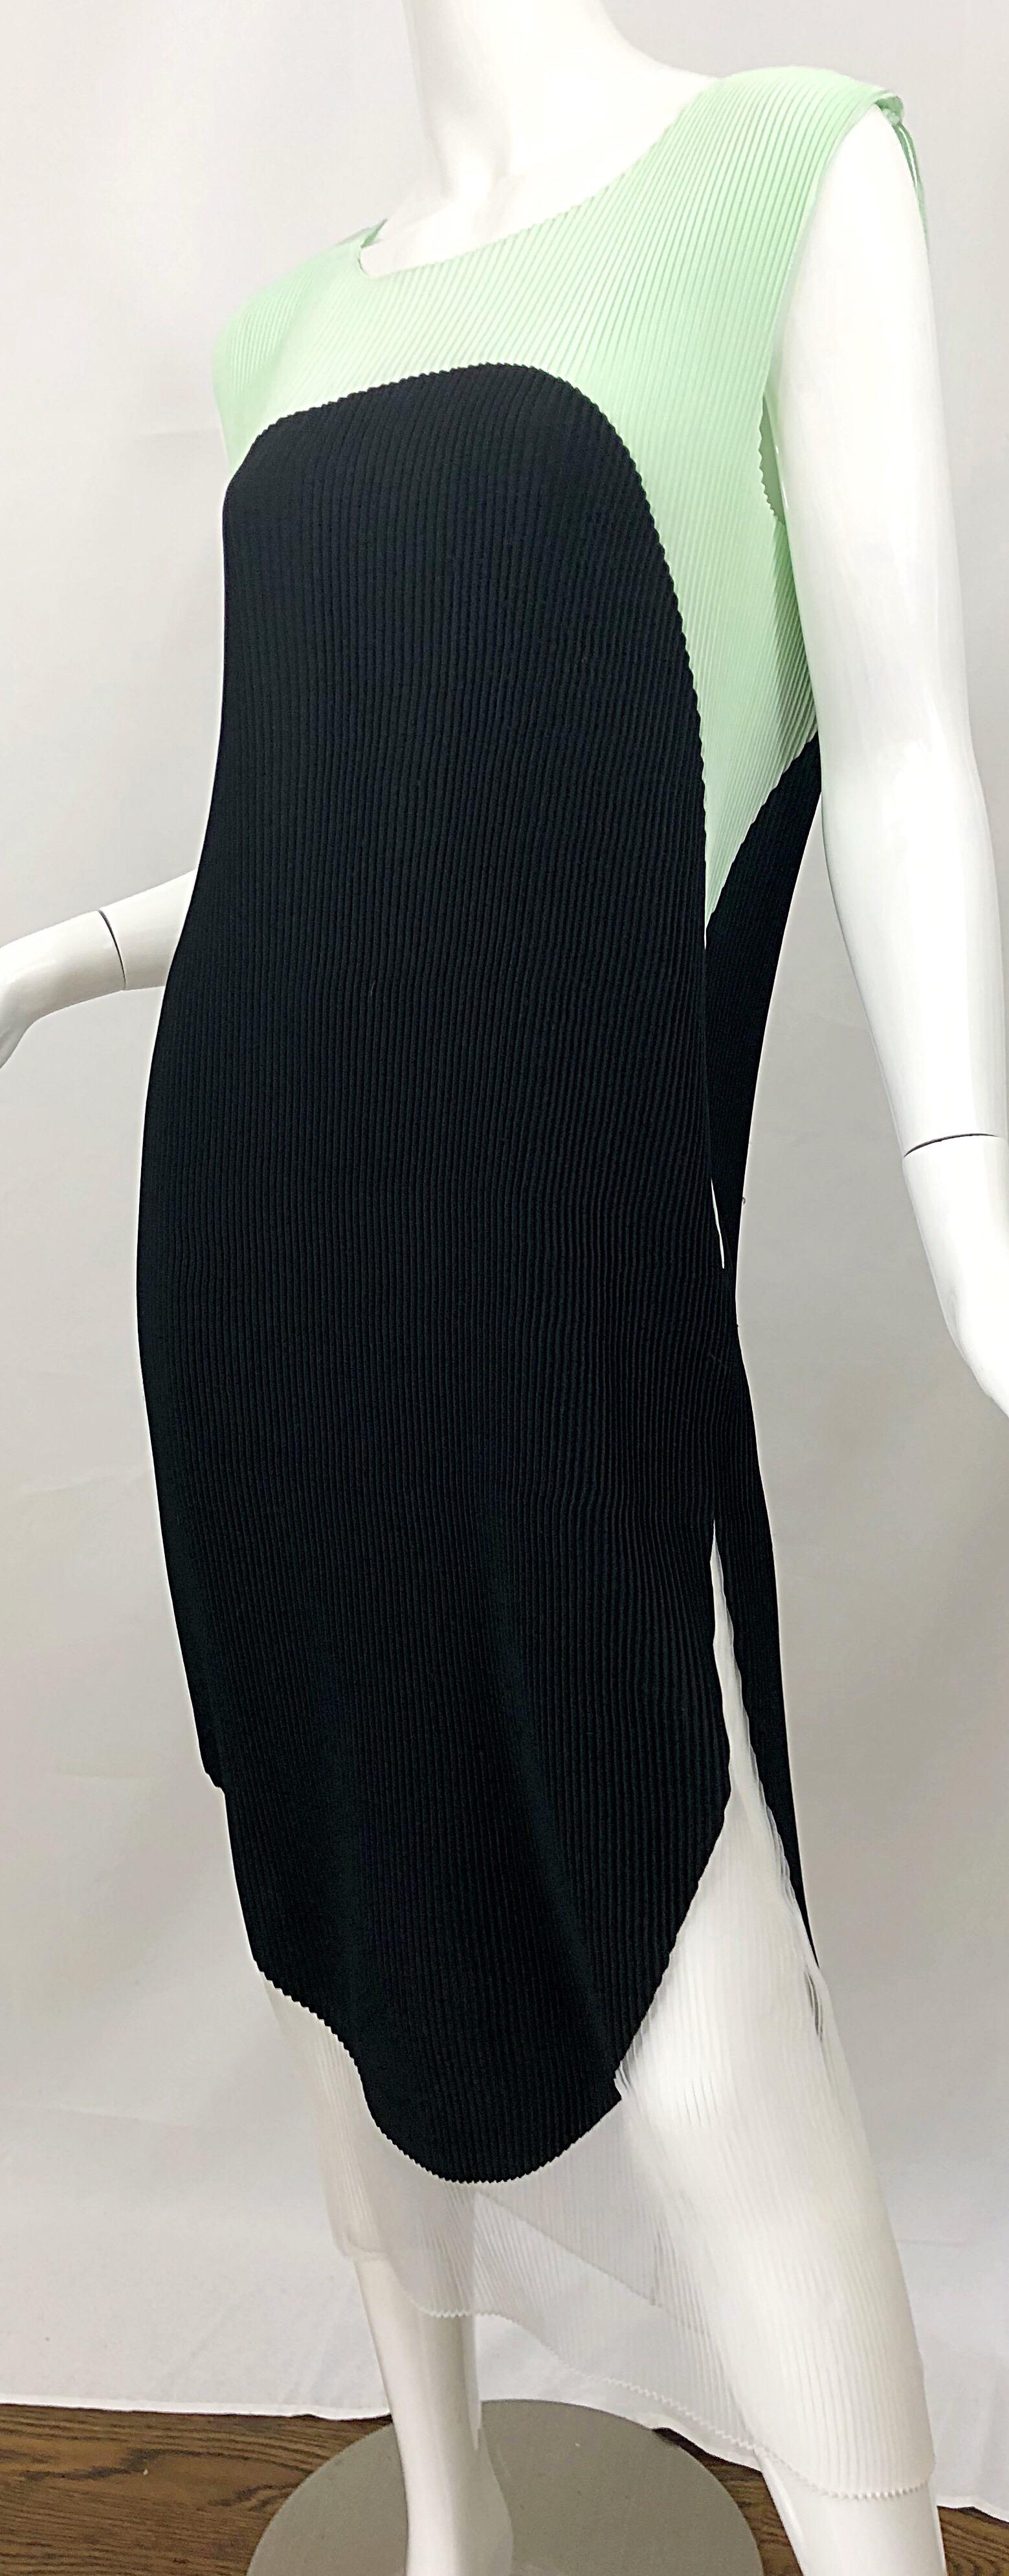 Stella McCartney Spring 2013 Runway Size 44 US 8 - 10 Color Block Pleated Dress For Sale 1